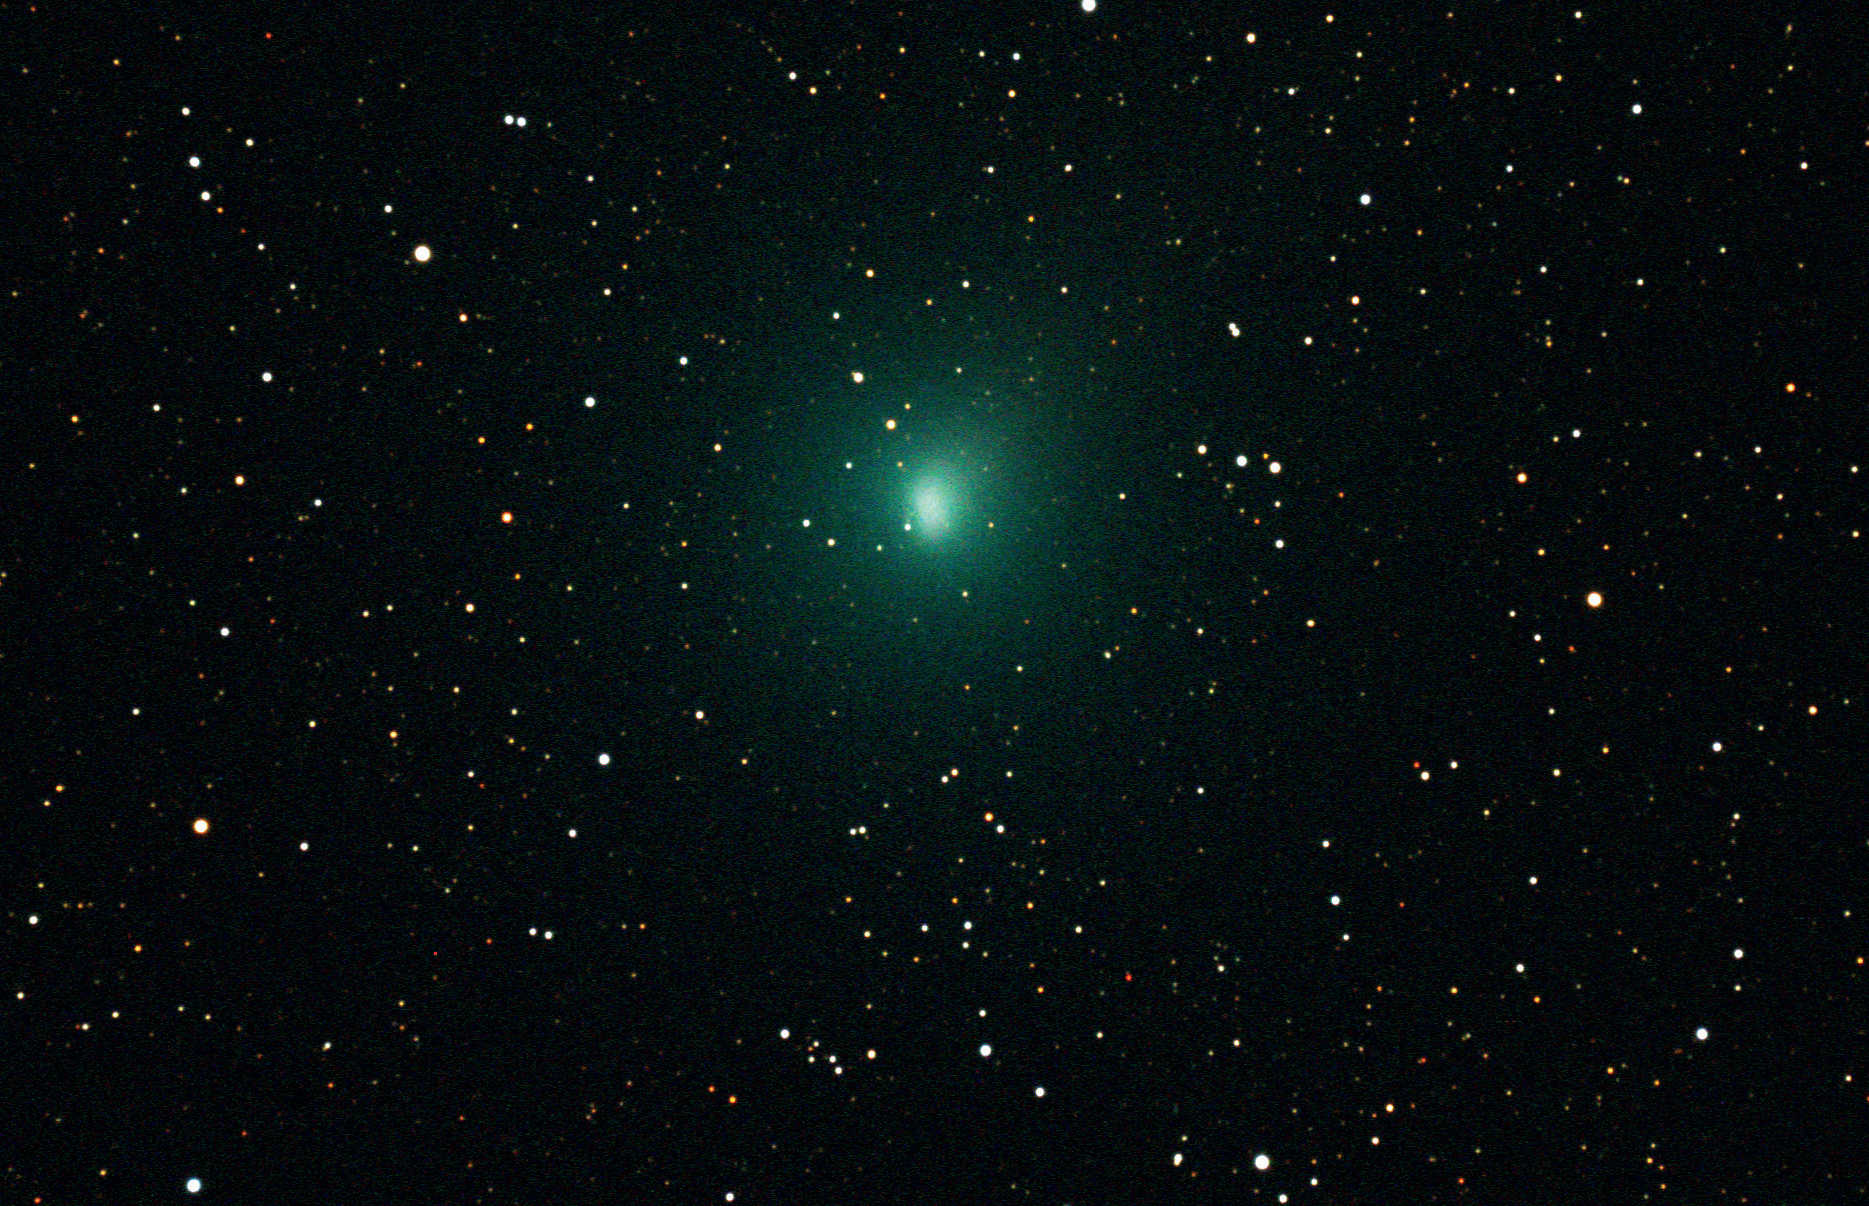 ... or you focus your image on the stars so that they appear to be point-shaped, but the comet's head is less sharply delineated. The raw data was produced on 11.10.2010 with a cooled SBIG ST-4000XCM CCD camera on a Takahashi TOA-130. These composite images are made up of eight single shots each with an exposure time of 120 seconds.